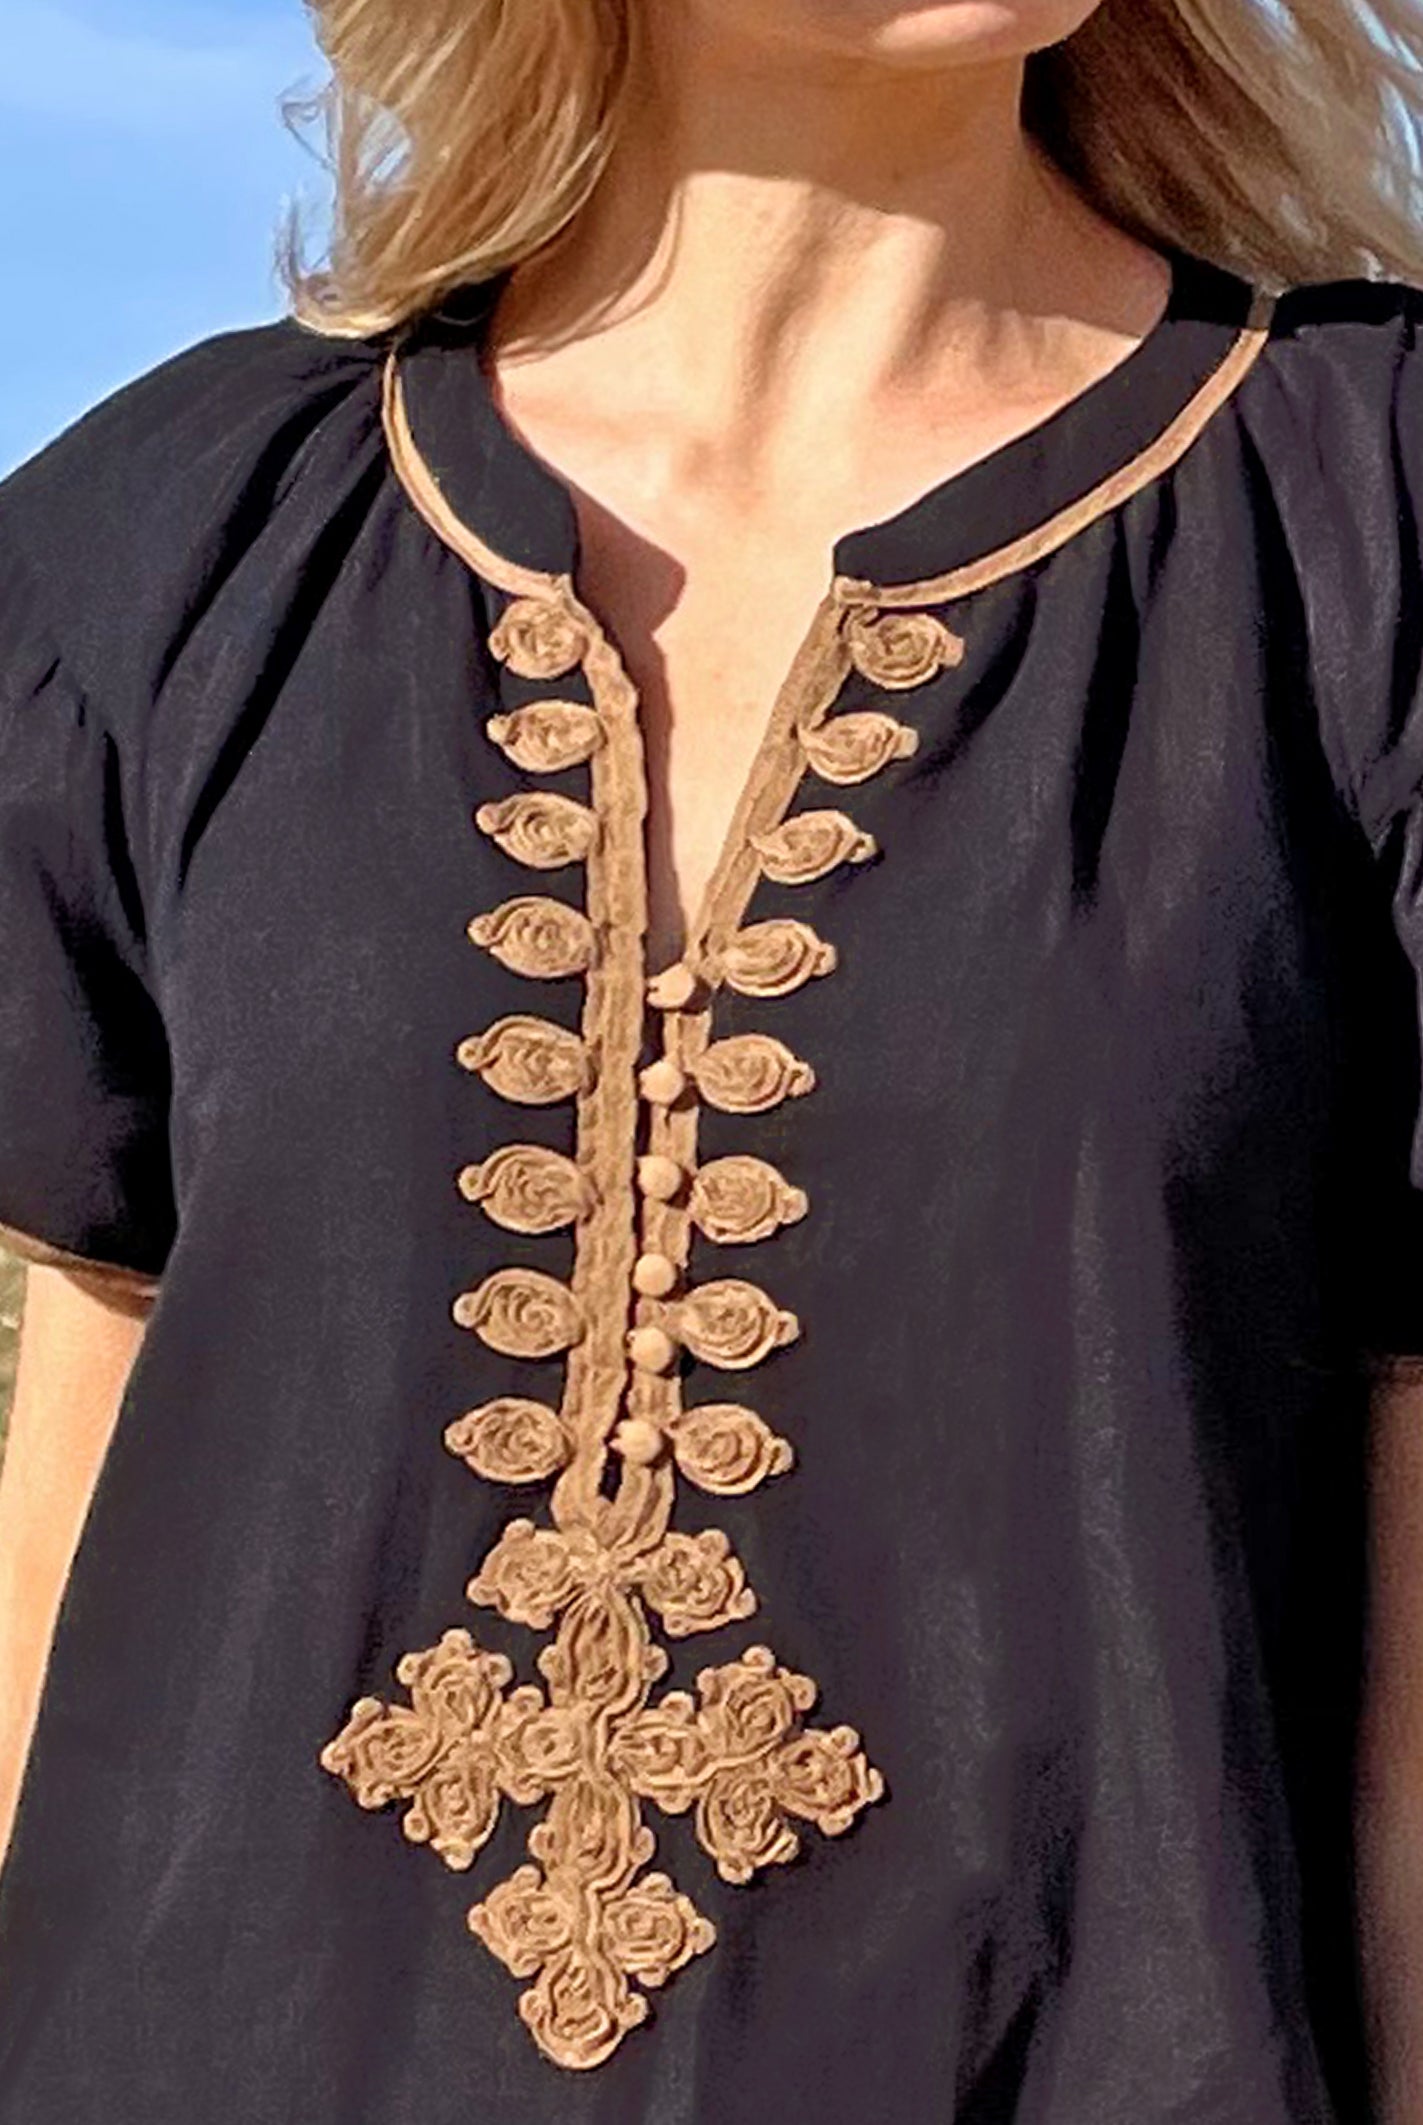 The passementerie embroidery details of the Rose and Rose Imperia top in black cotton.